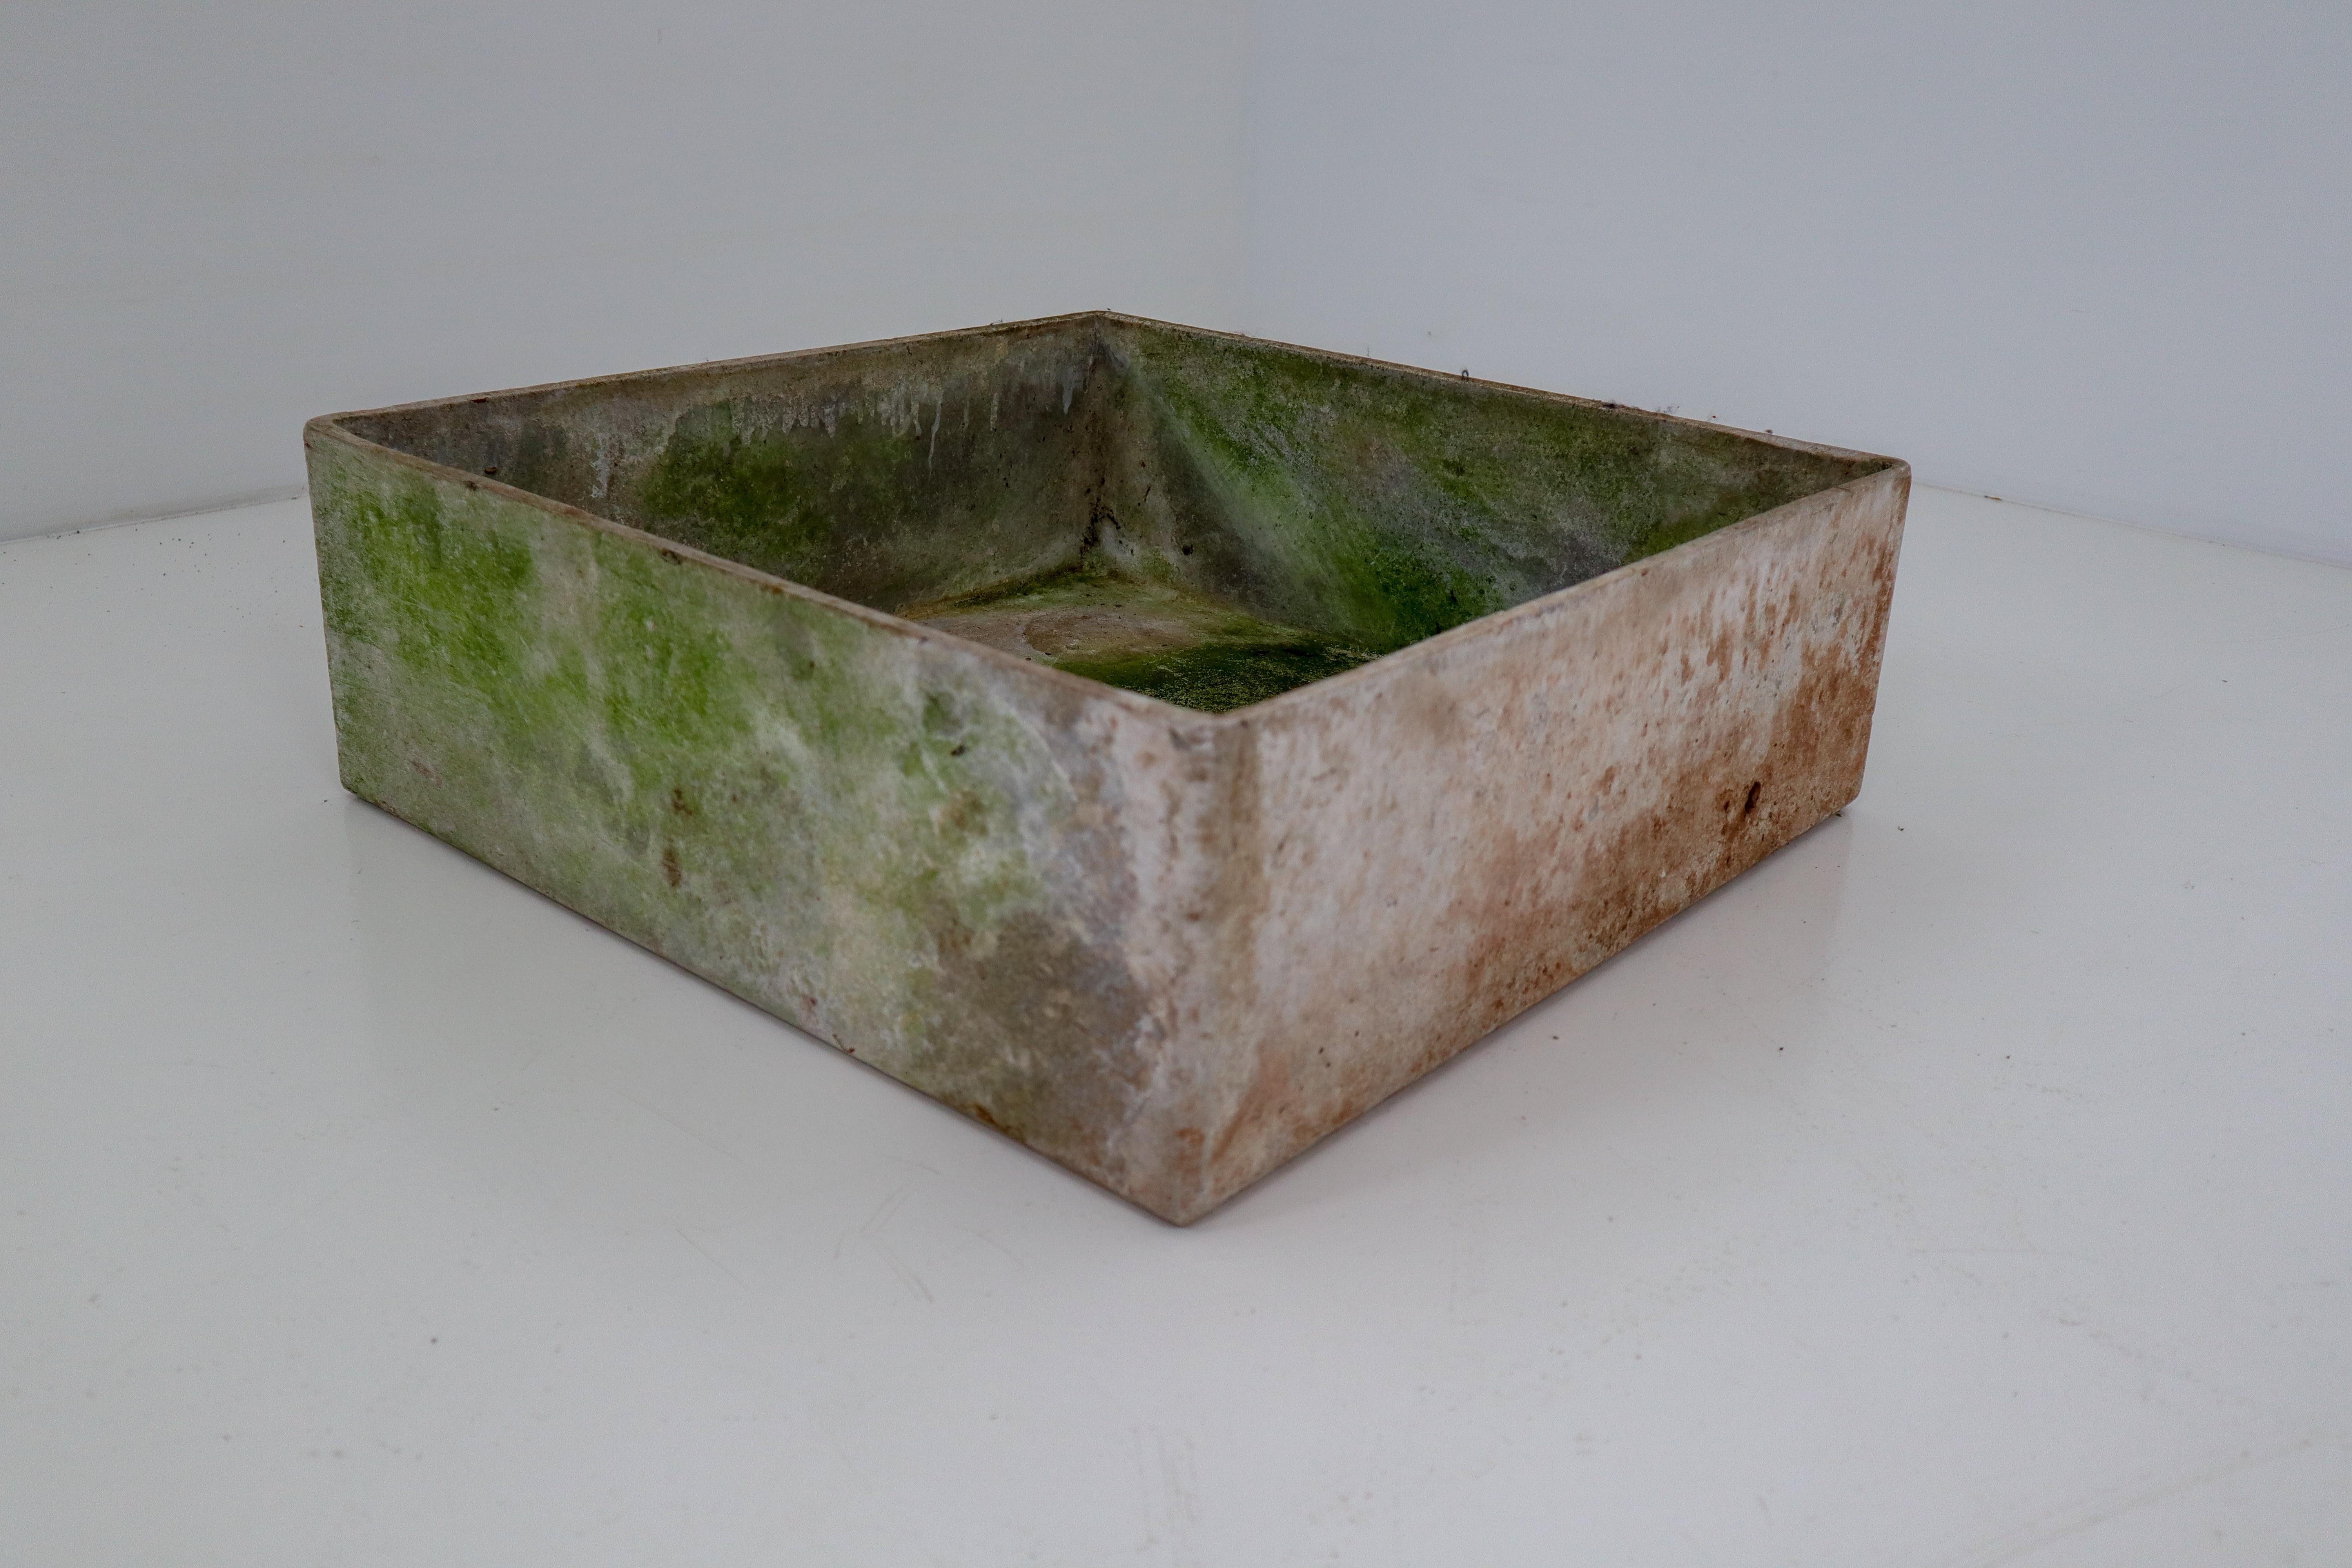 Rare midcentury square concrete planter by Swiss architect Willy Guhl for Eternit. Excellent patina and coloring. Great sculptural planter or garden objects. Perfect for indoors or outside.